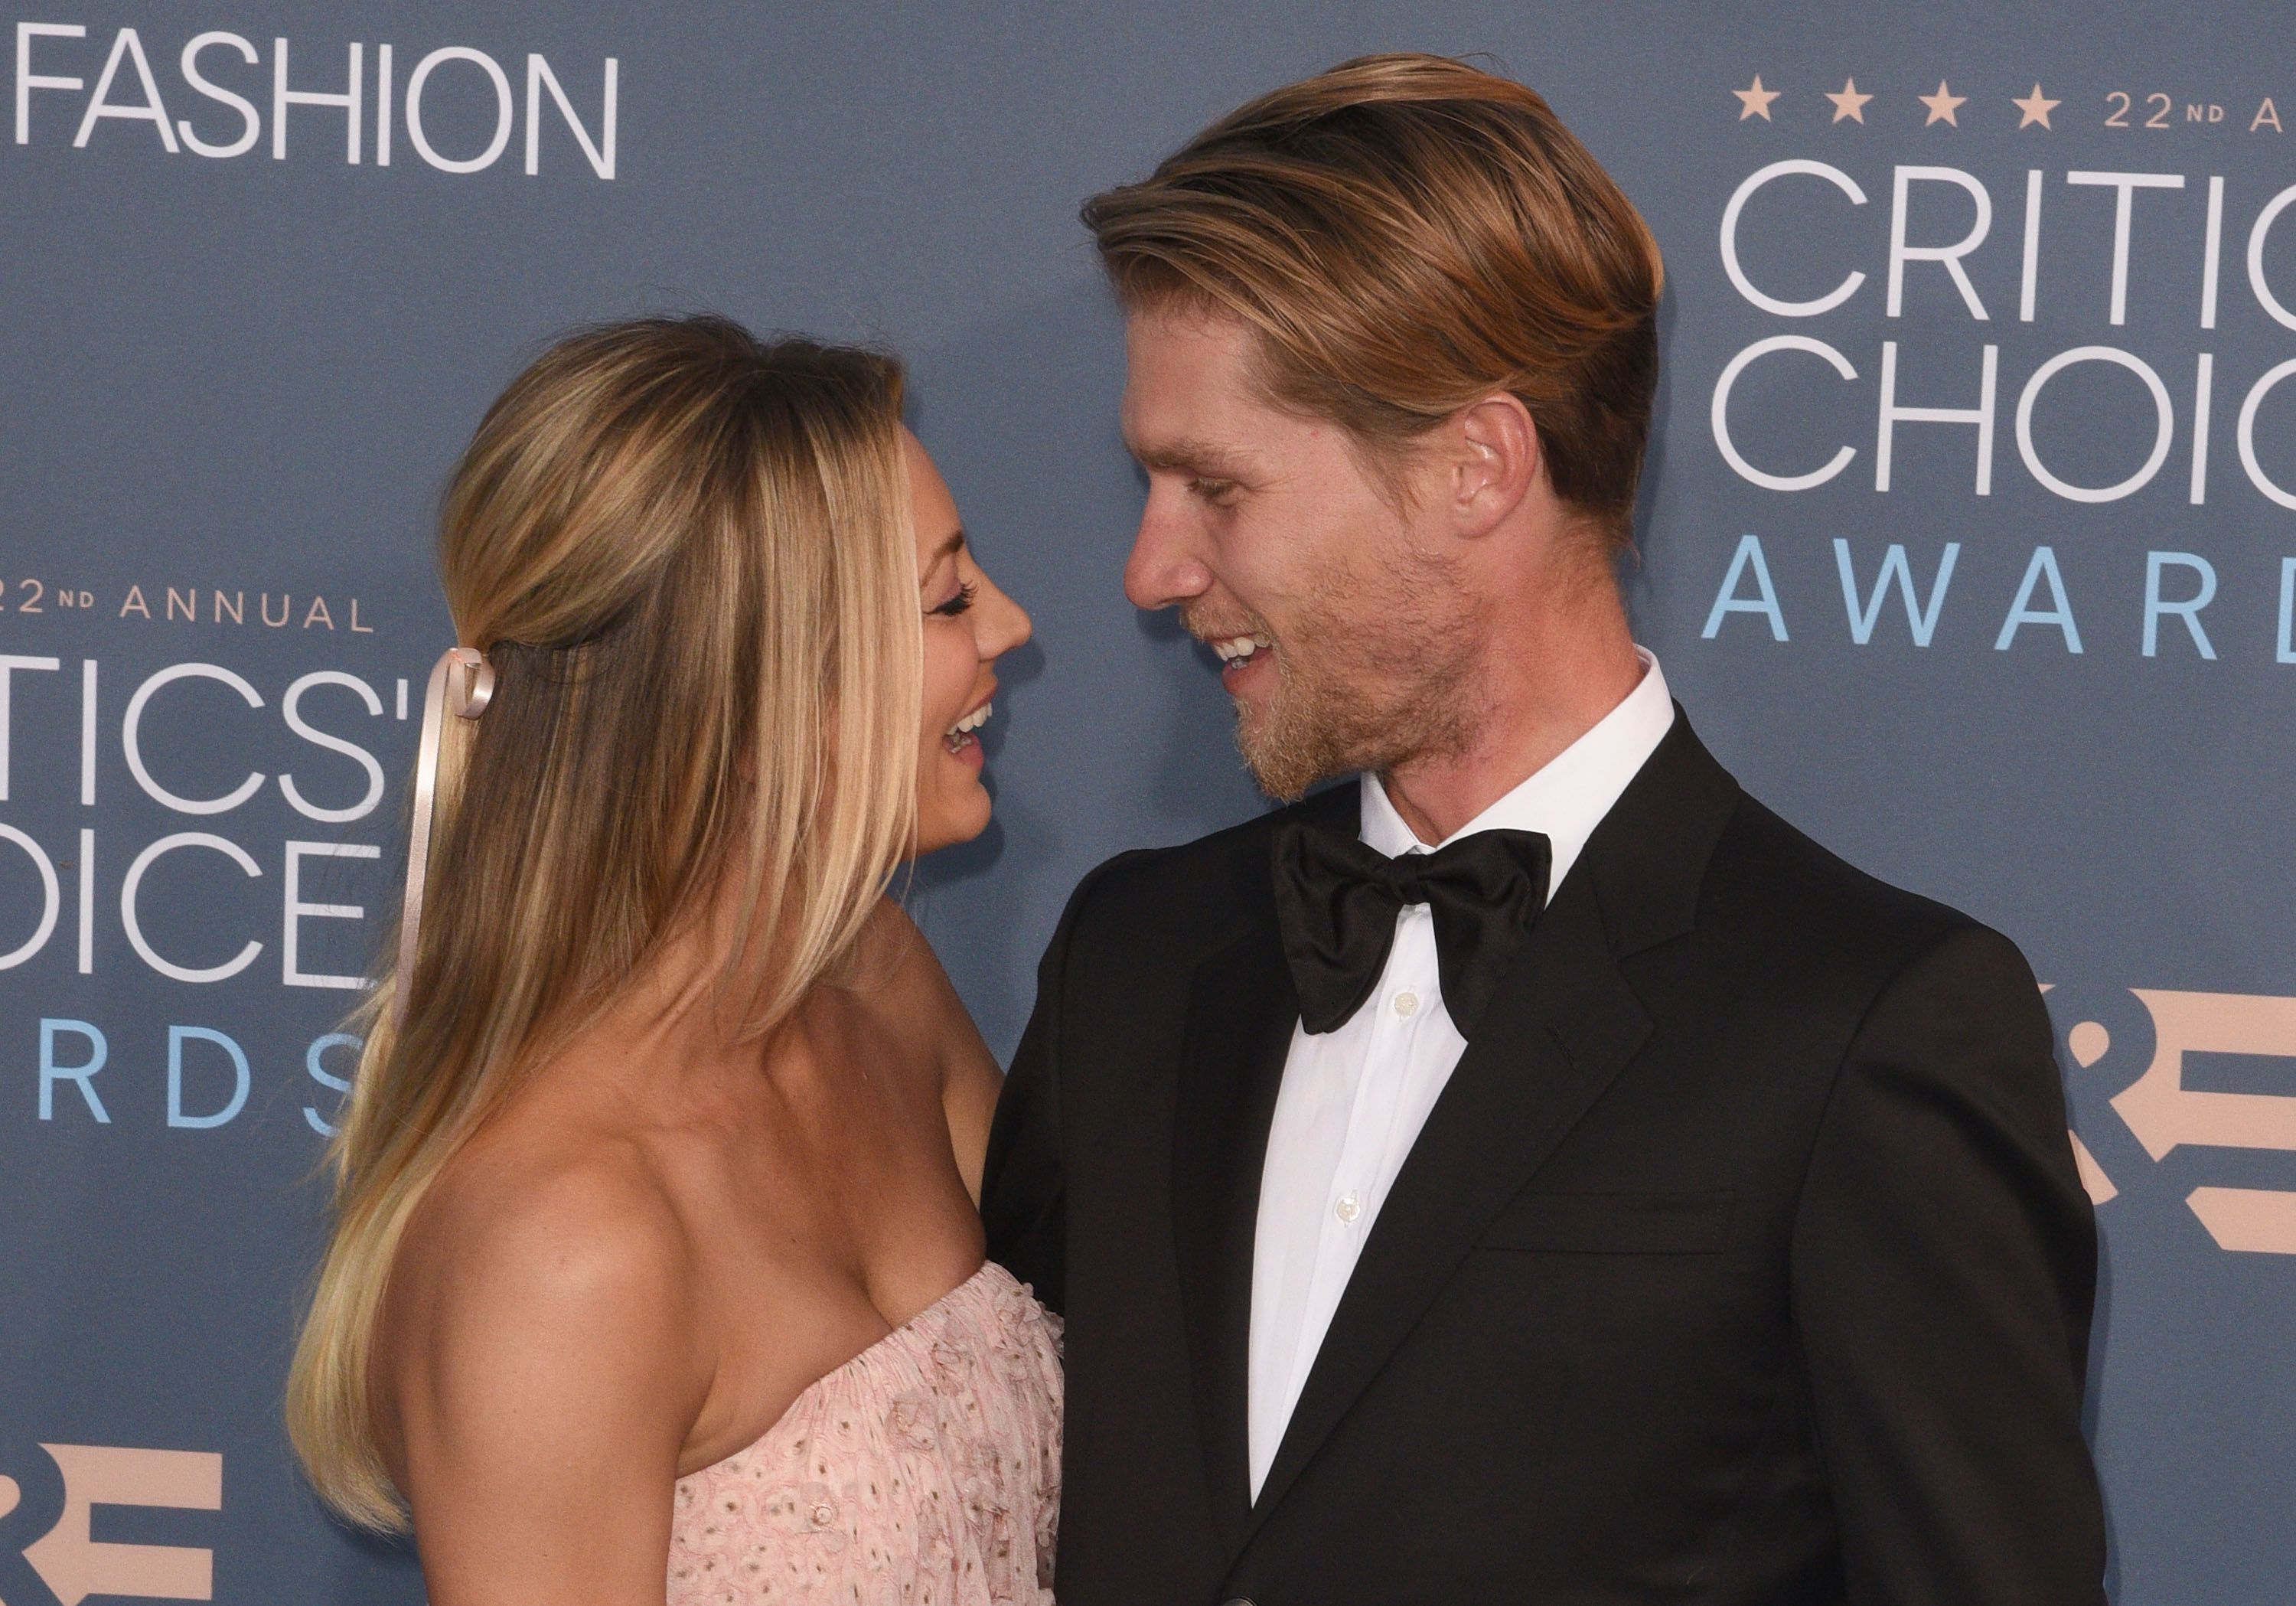 Kaley Cuoco and Karl Cook at The 22nd Annual Critics' Choice Awards at Barker Hangar in Santa Monica, California | Photo: Gregg DeGuire/WireImage via Getty Images